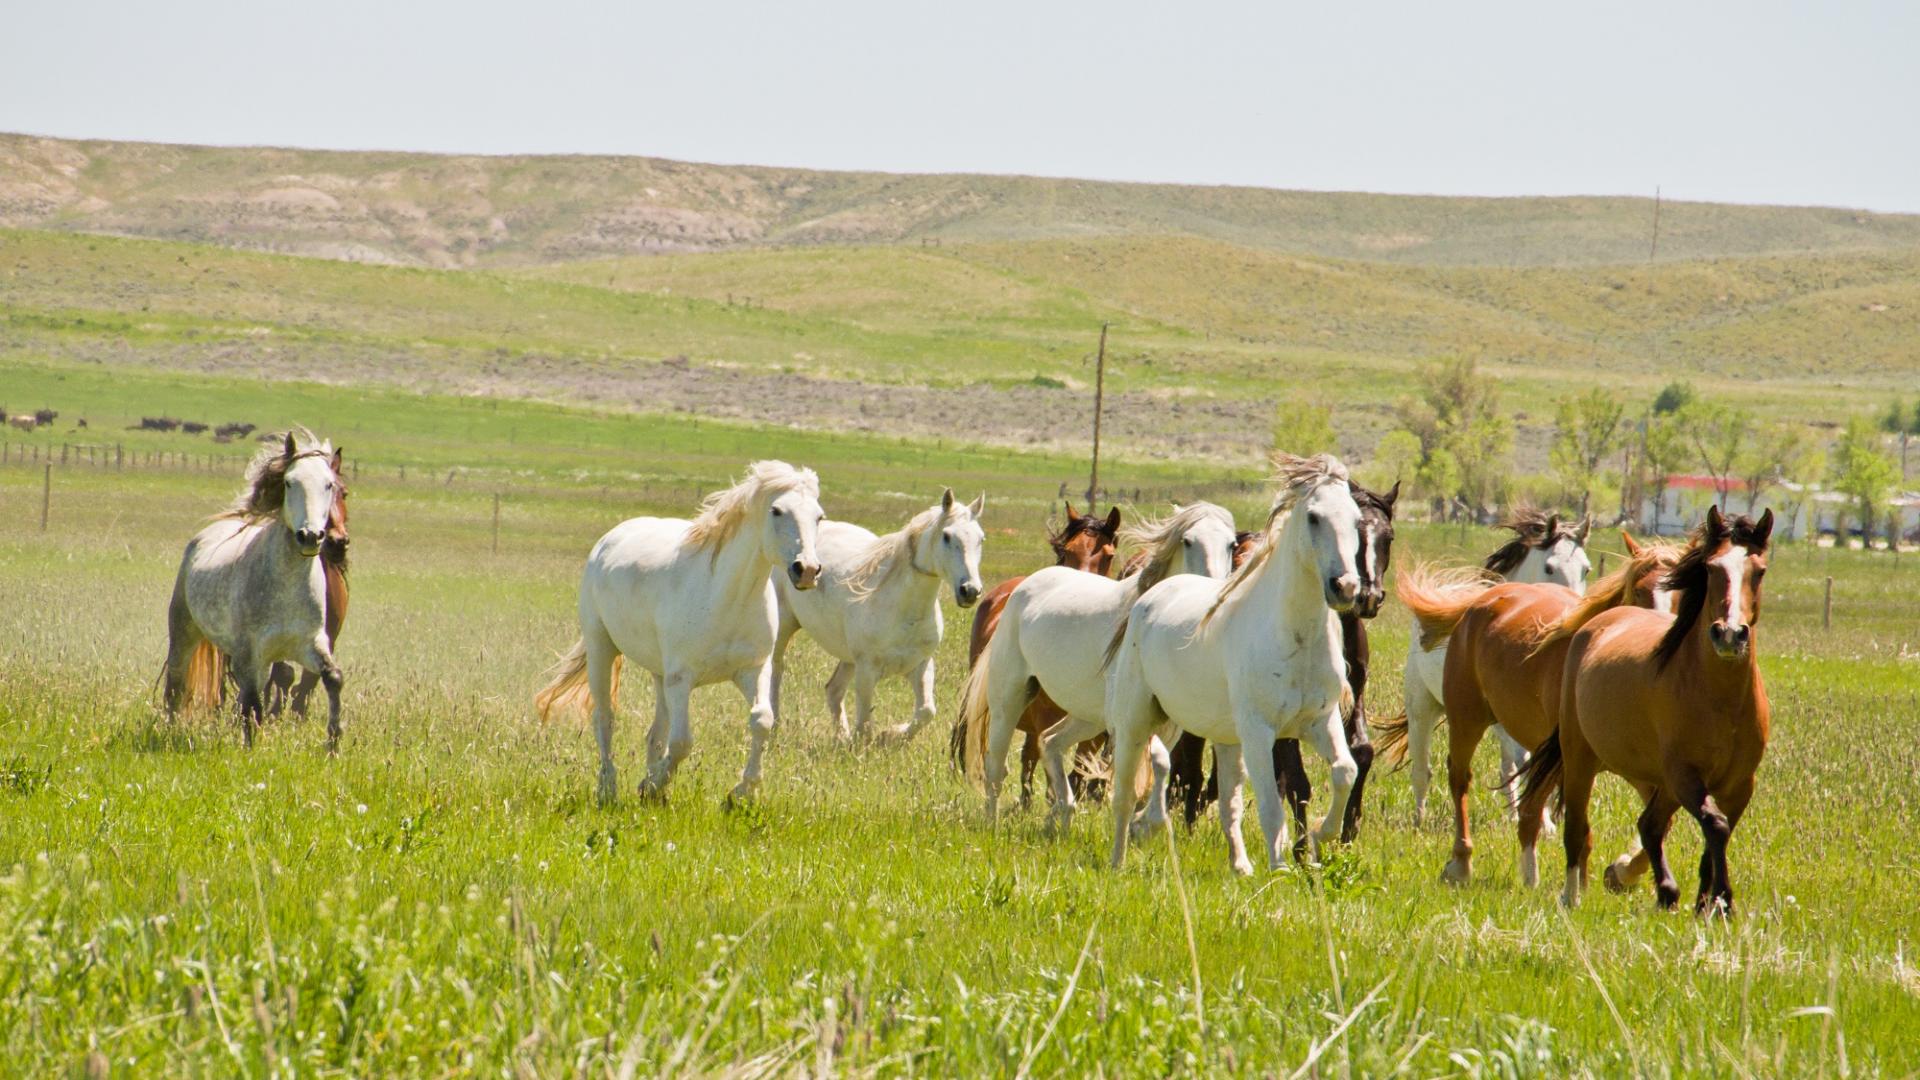 Wild Horses in Wyoming | Travel Wyoming. That's WY